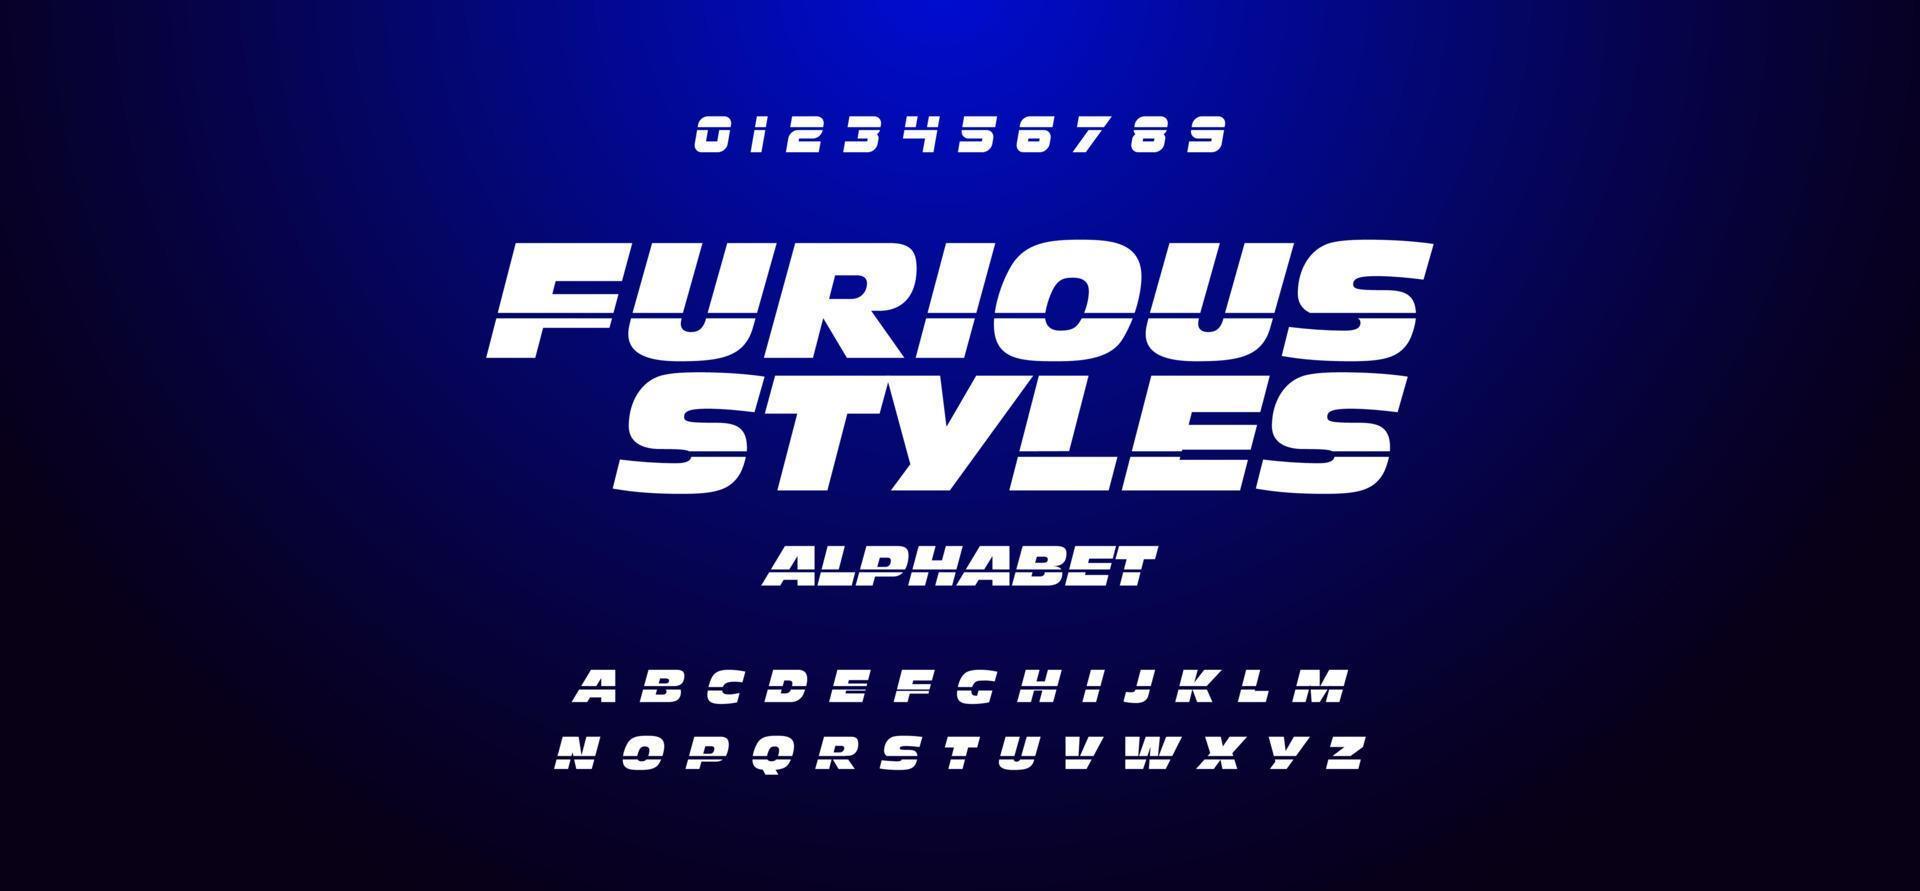 Fast and furious style fonts. Vector. vector